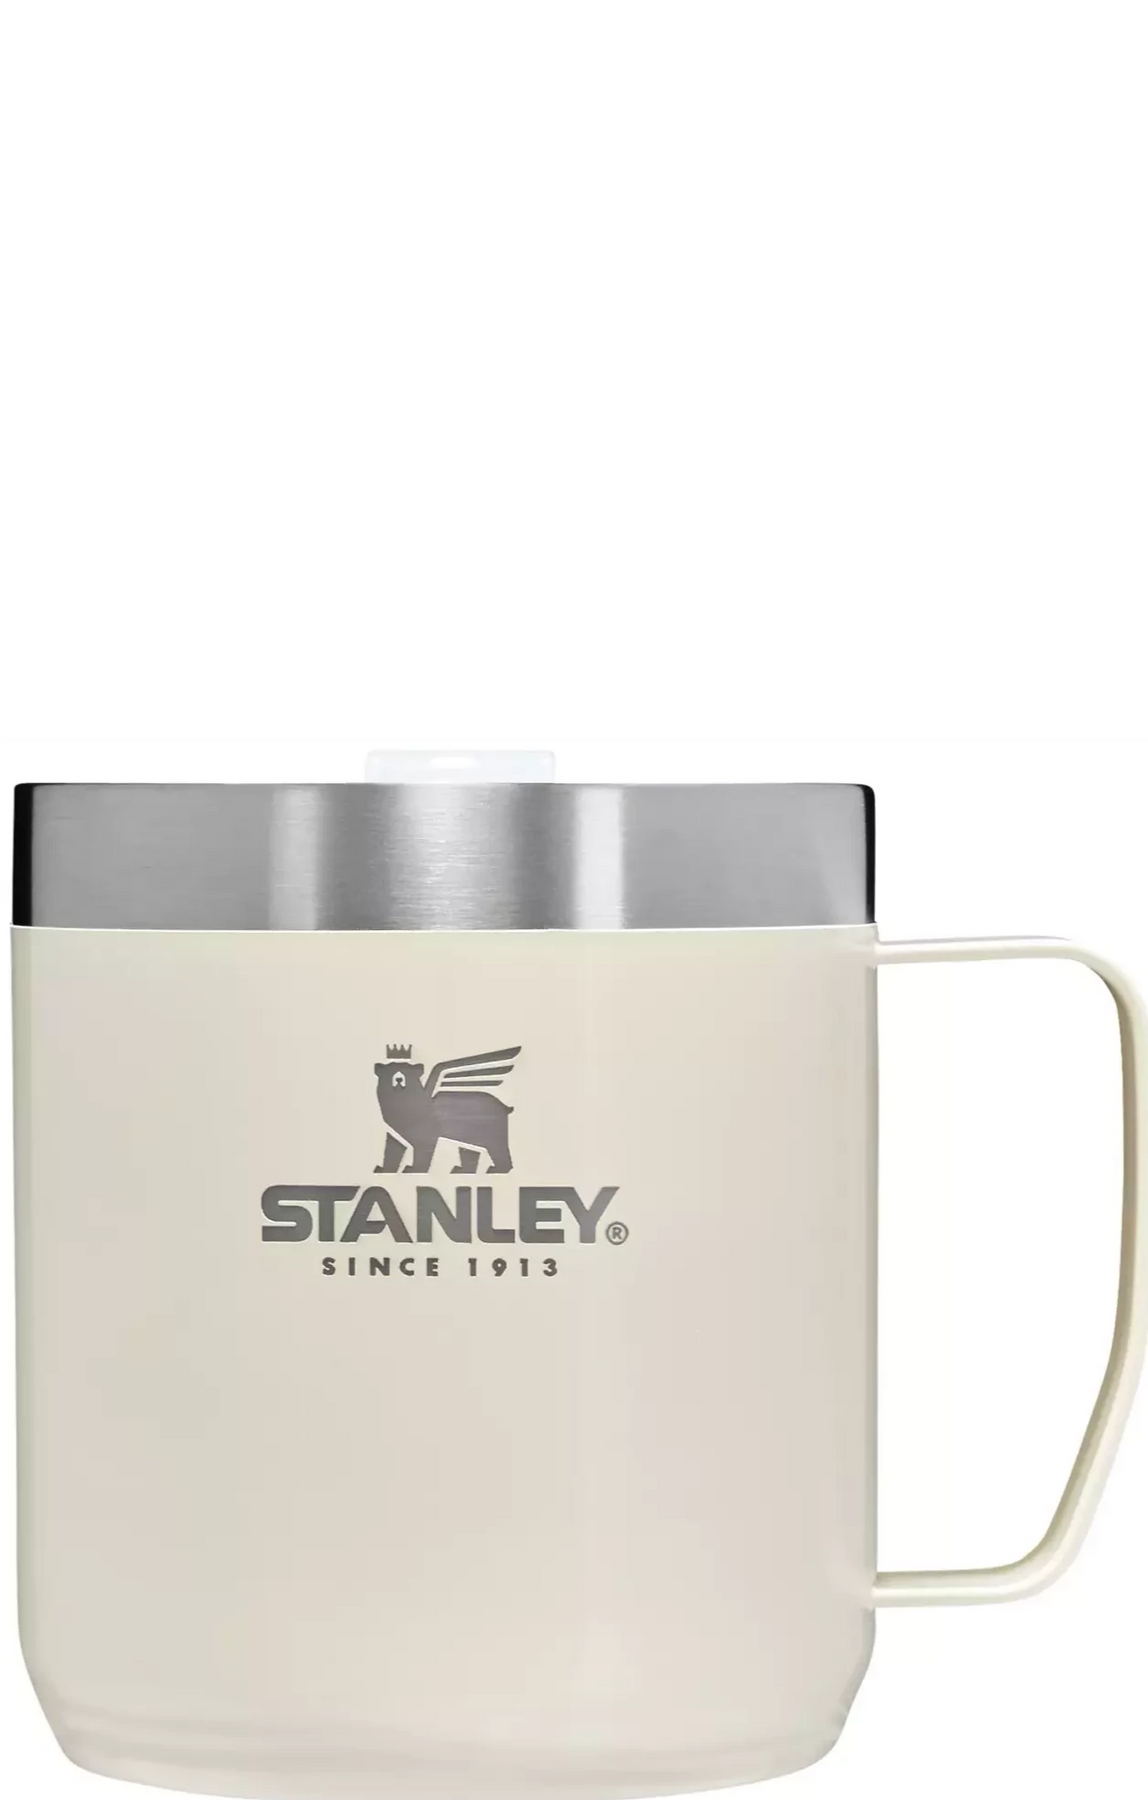 Stanley Camping Products: 11-Piece Adventure Even-Heat Camp Pro Cookset $73.50, Classic Perfect-Brew Pour Over $13.65 & More + Free Shipping on $70+